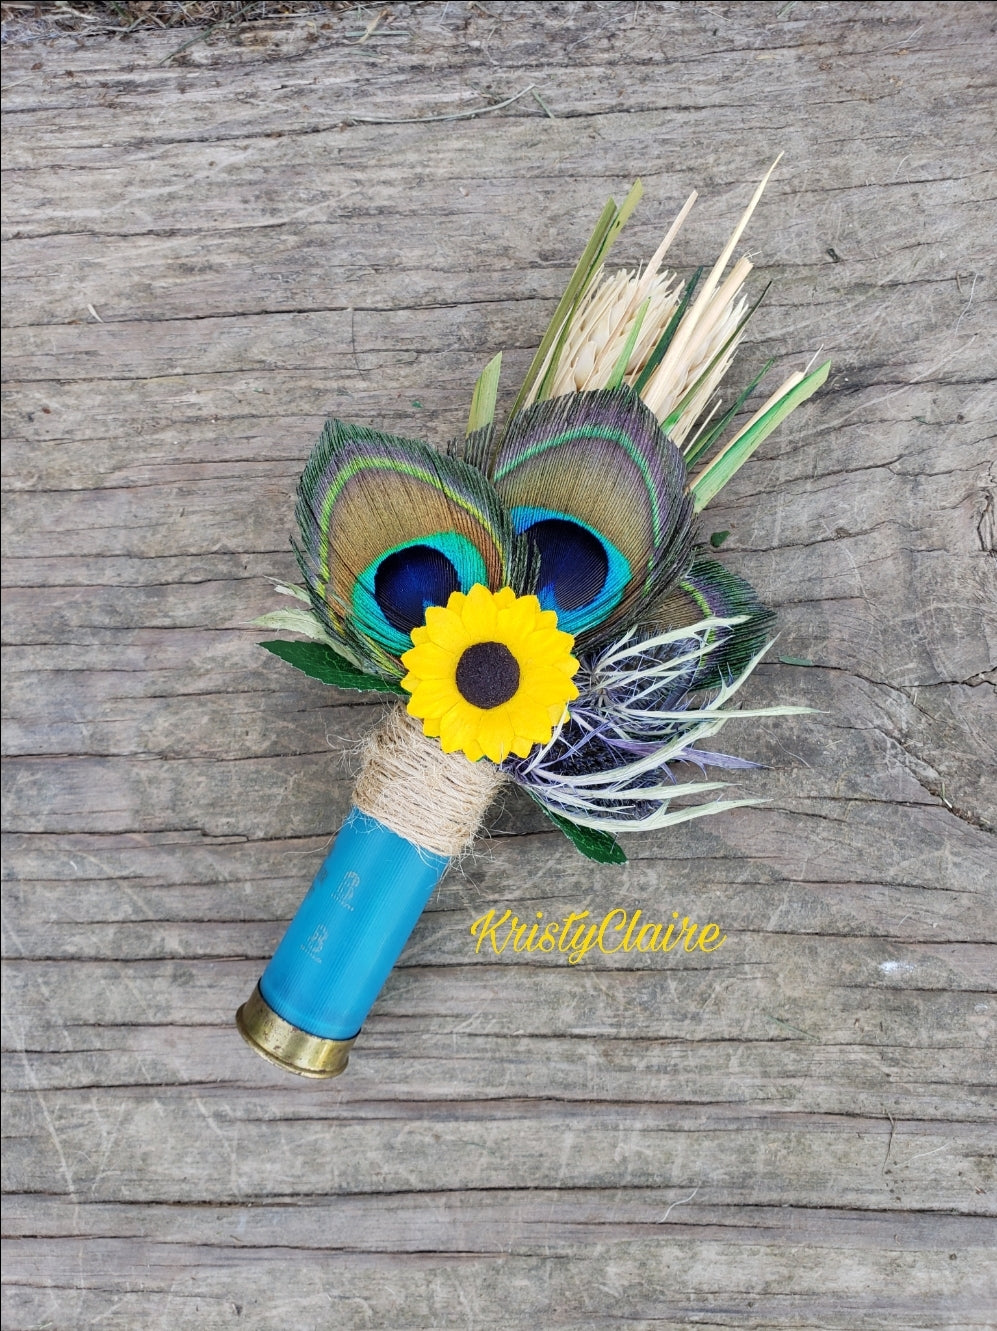 Peacock, Sunflower, Teal Shotgun Shell Boutonniere, Lapel, Pin-on, Buttonhole, Corsage, Turquoise, Dried Wheat, Grass, Thistle,  Peacock Feathers